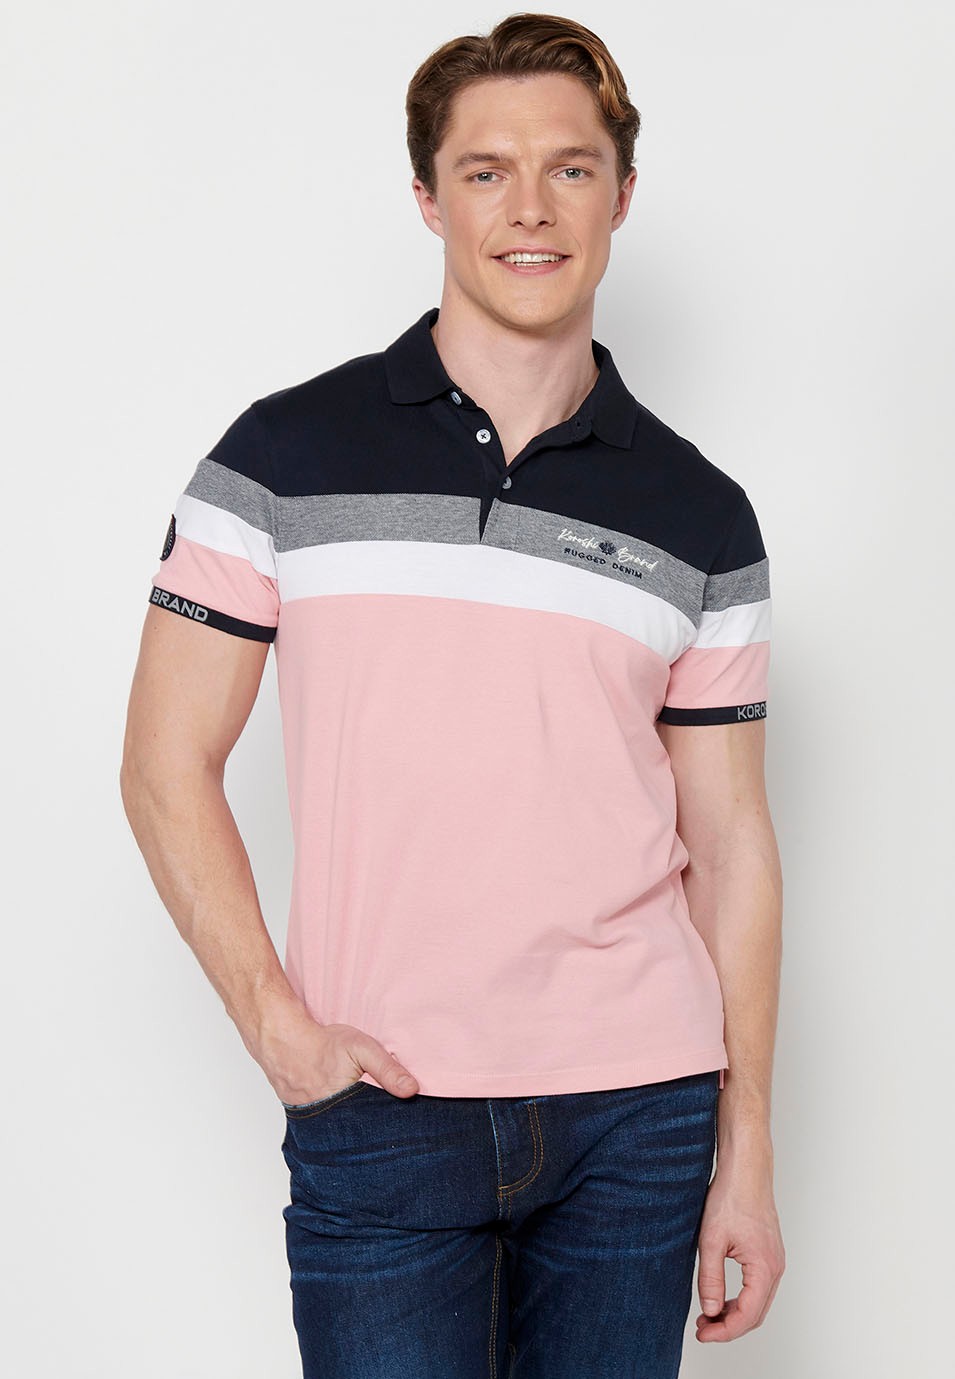 100% cotton short-sleeved polo shirt, striped detail on the chest, pink color for men